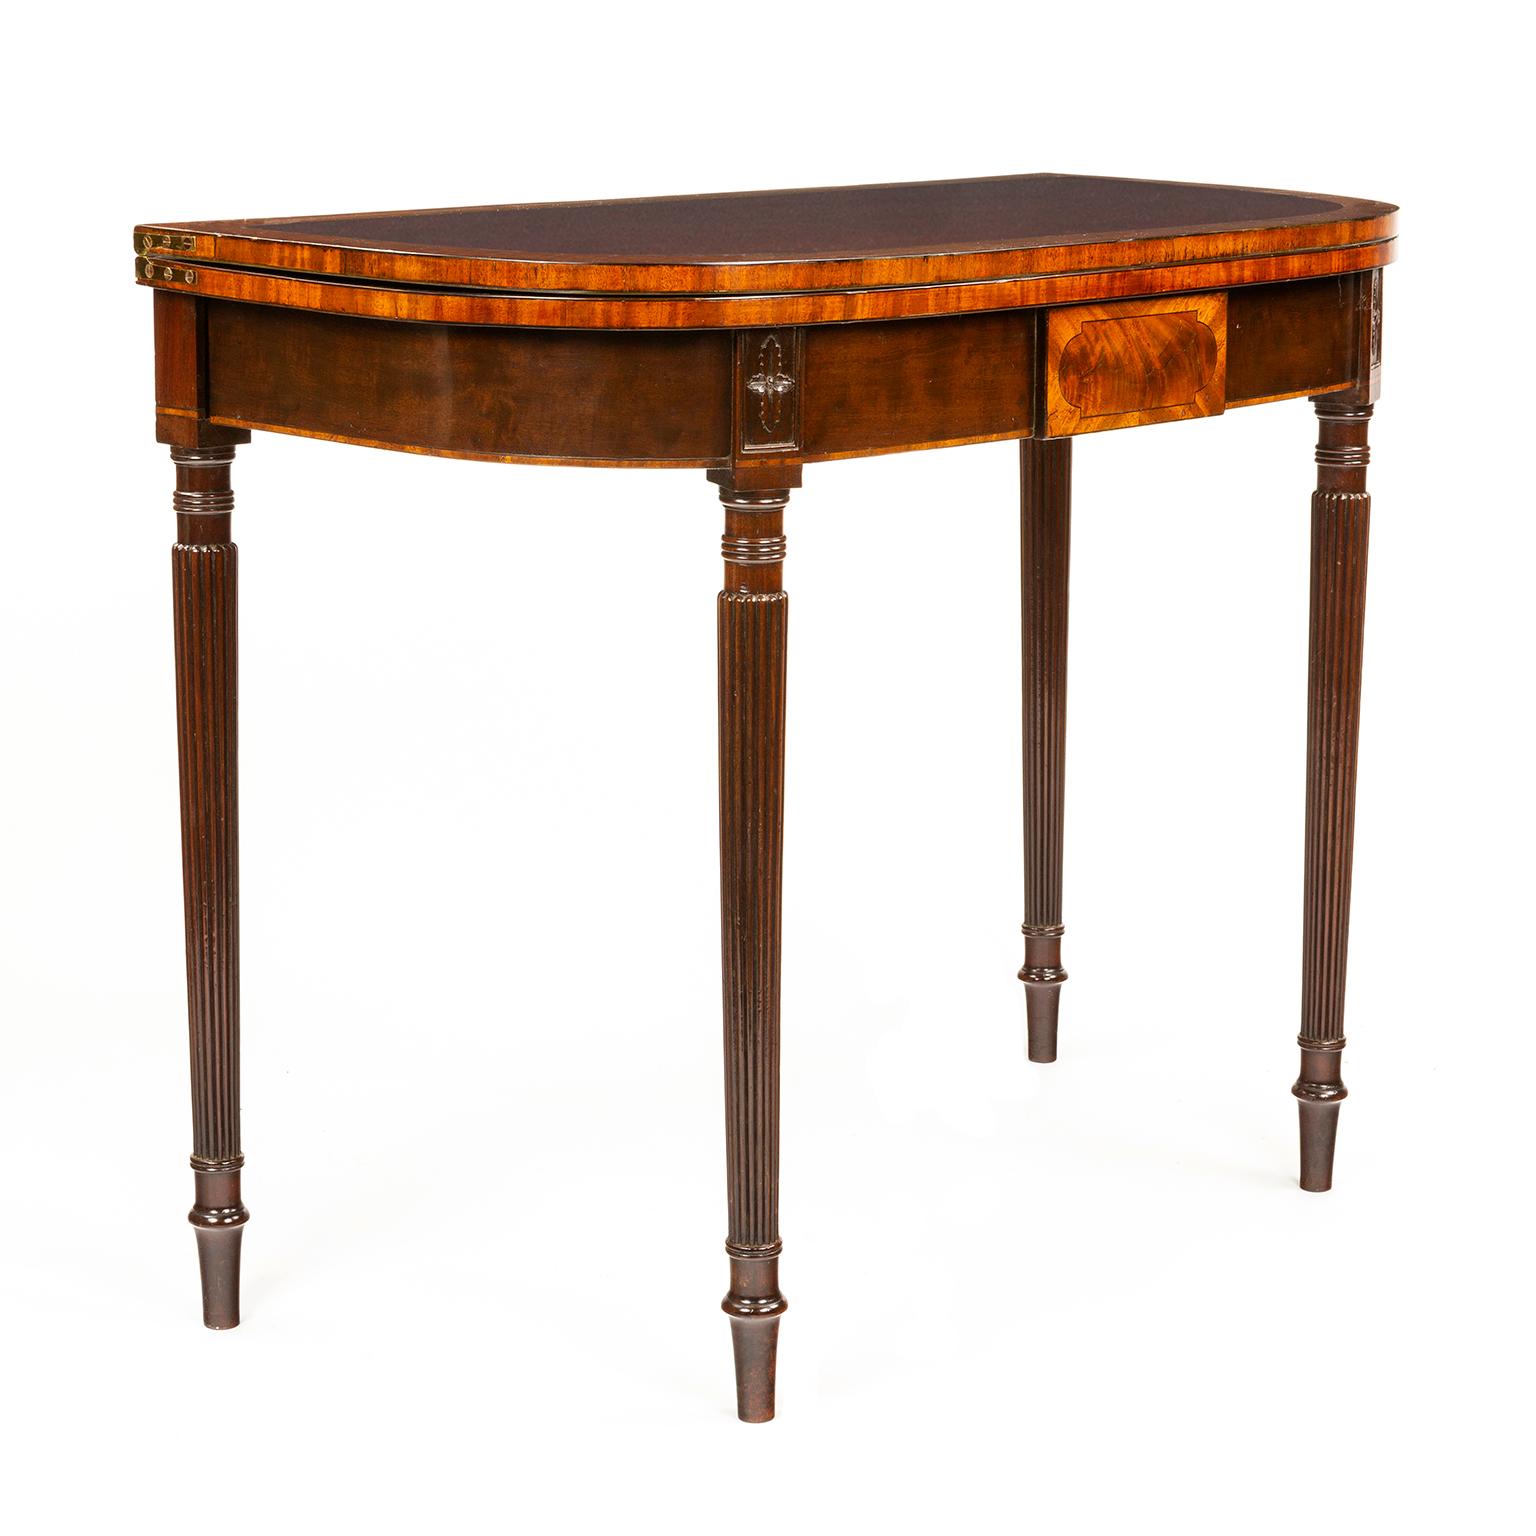 British Gillows, Regency, Rosewood Fold over Tea Table